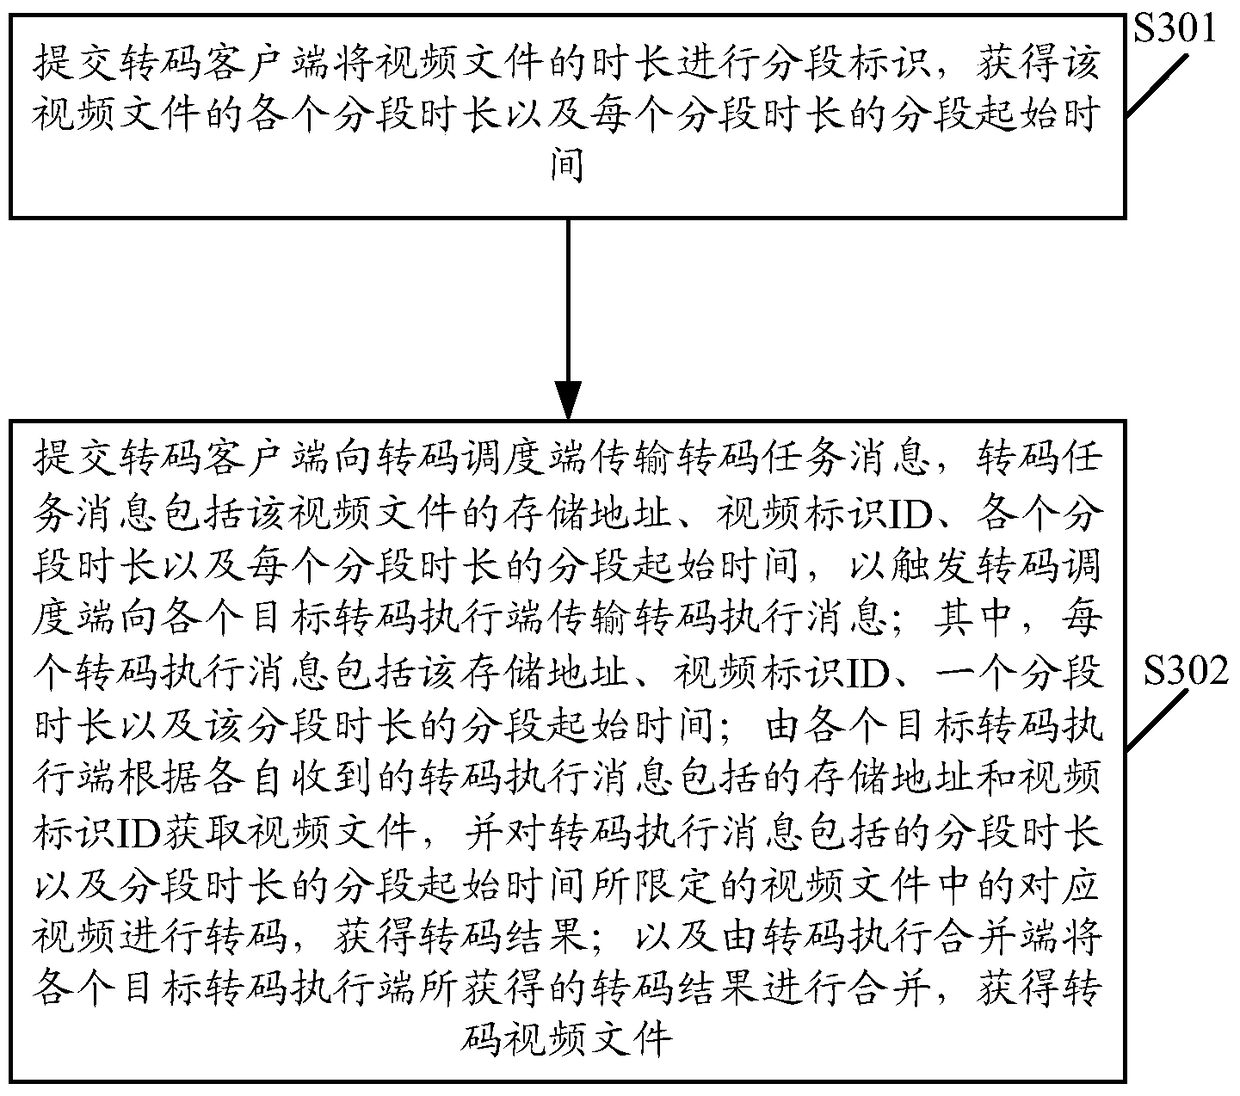 A distributed video transcoding method and related equipment and system